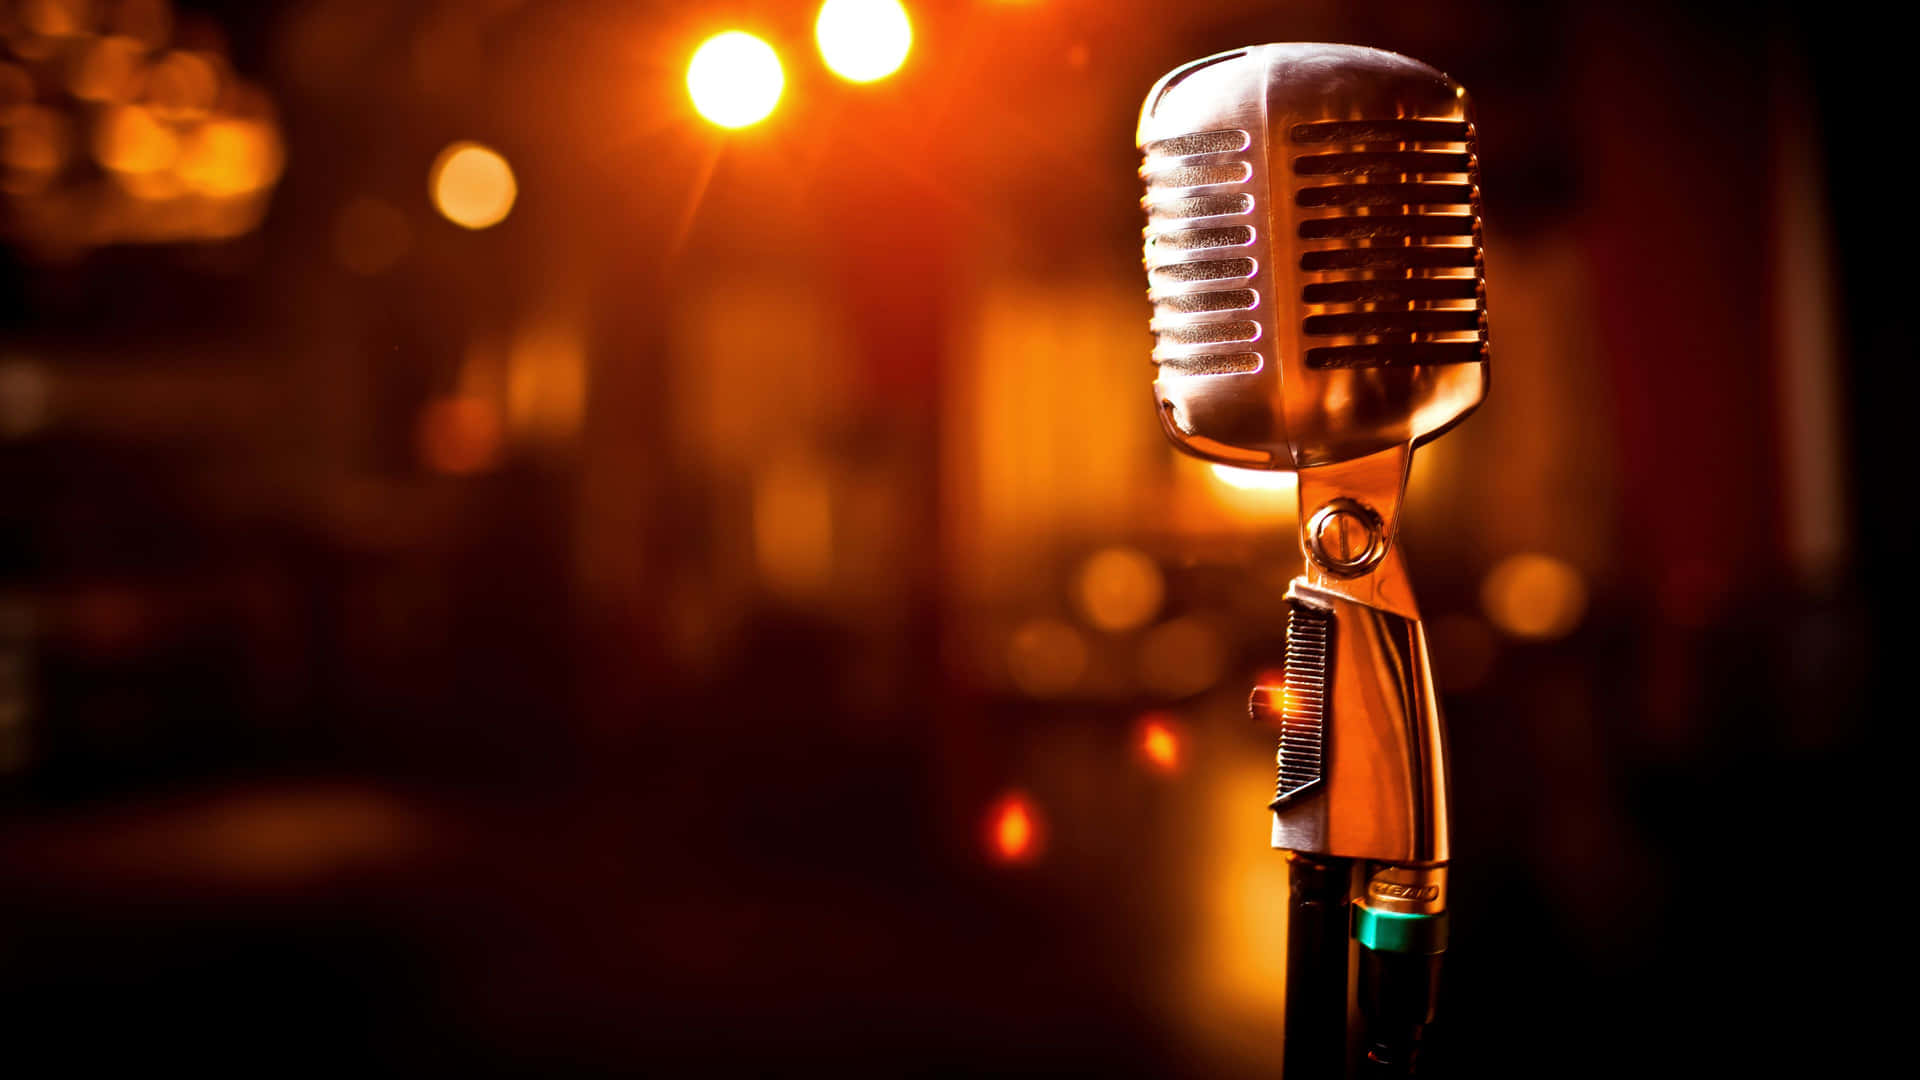 Carbon Microphone In Front Of Glaring Lights Wallpaper